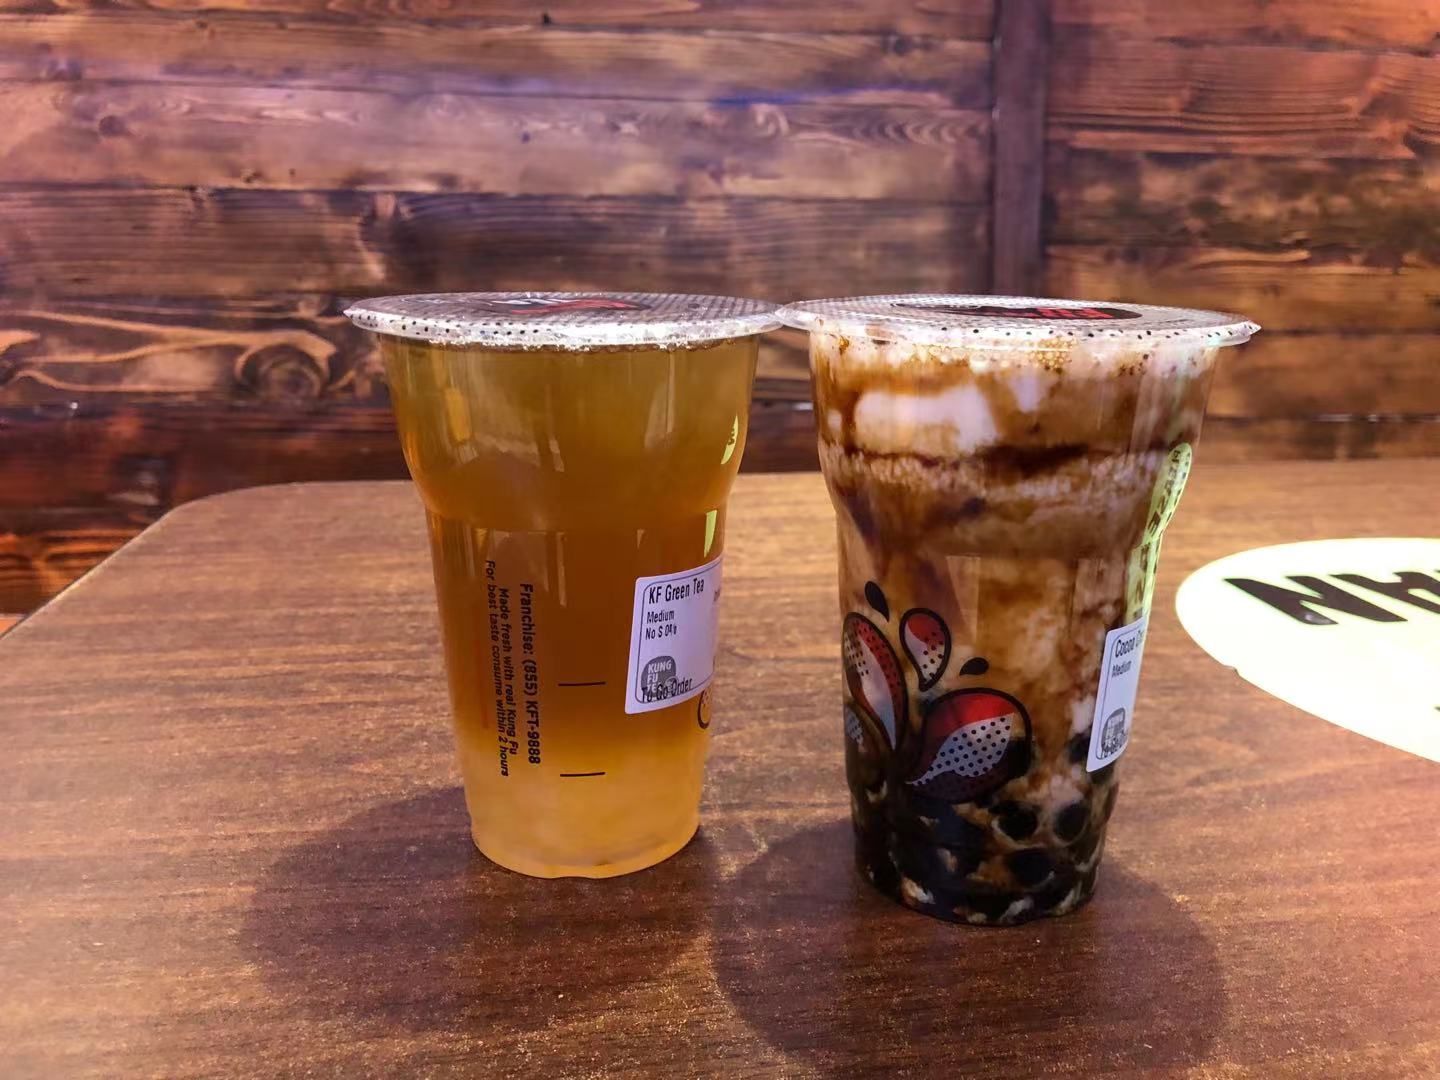 On a brown wooden table, there are two boba drinks in plastic to go cups with covers. Photo by Xiaohui Zhang.